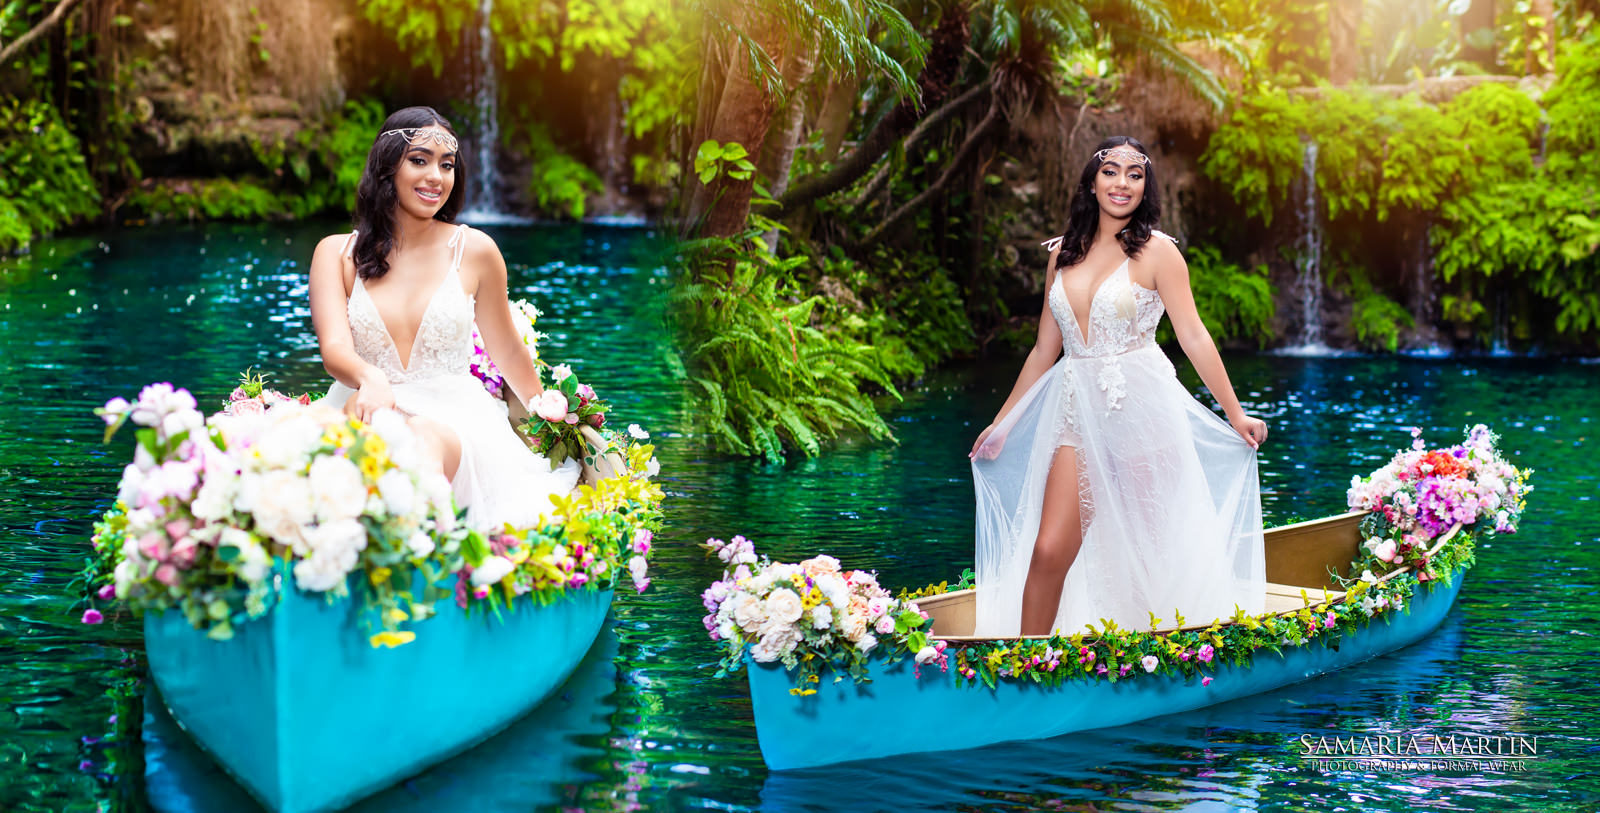 Quinceanera with flowers, quinceanera photoshoot in a lake, 15 photoshoot with flowers, best Tampa photographer, Samaria Martin photography (7)